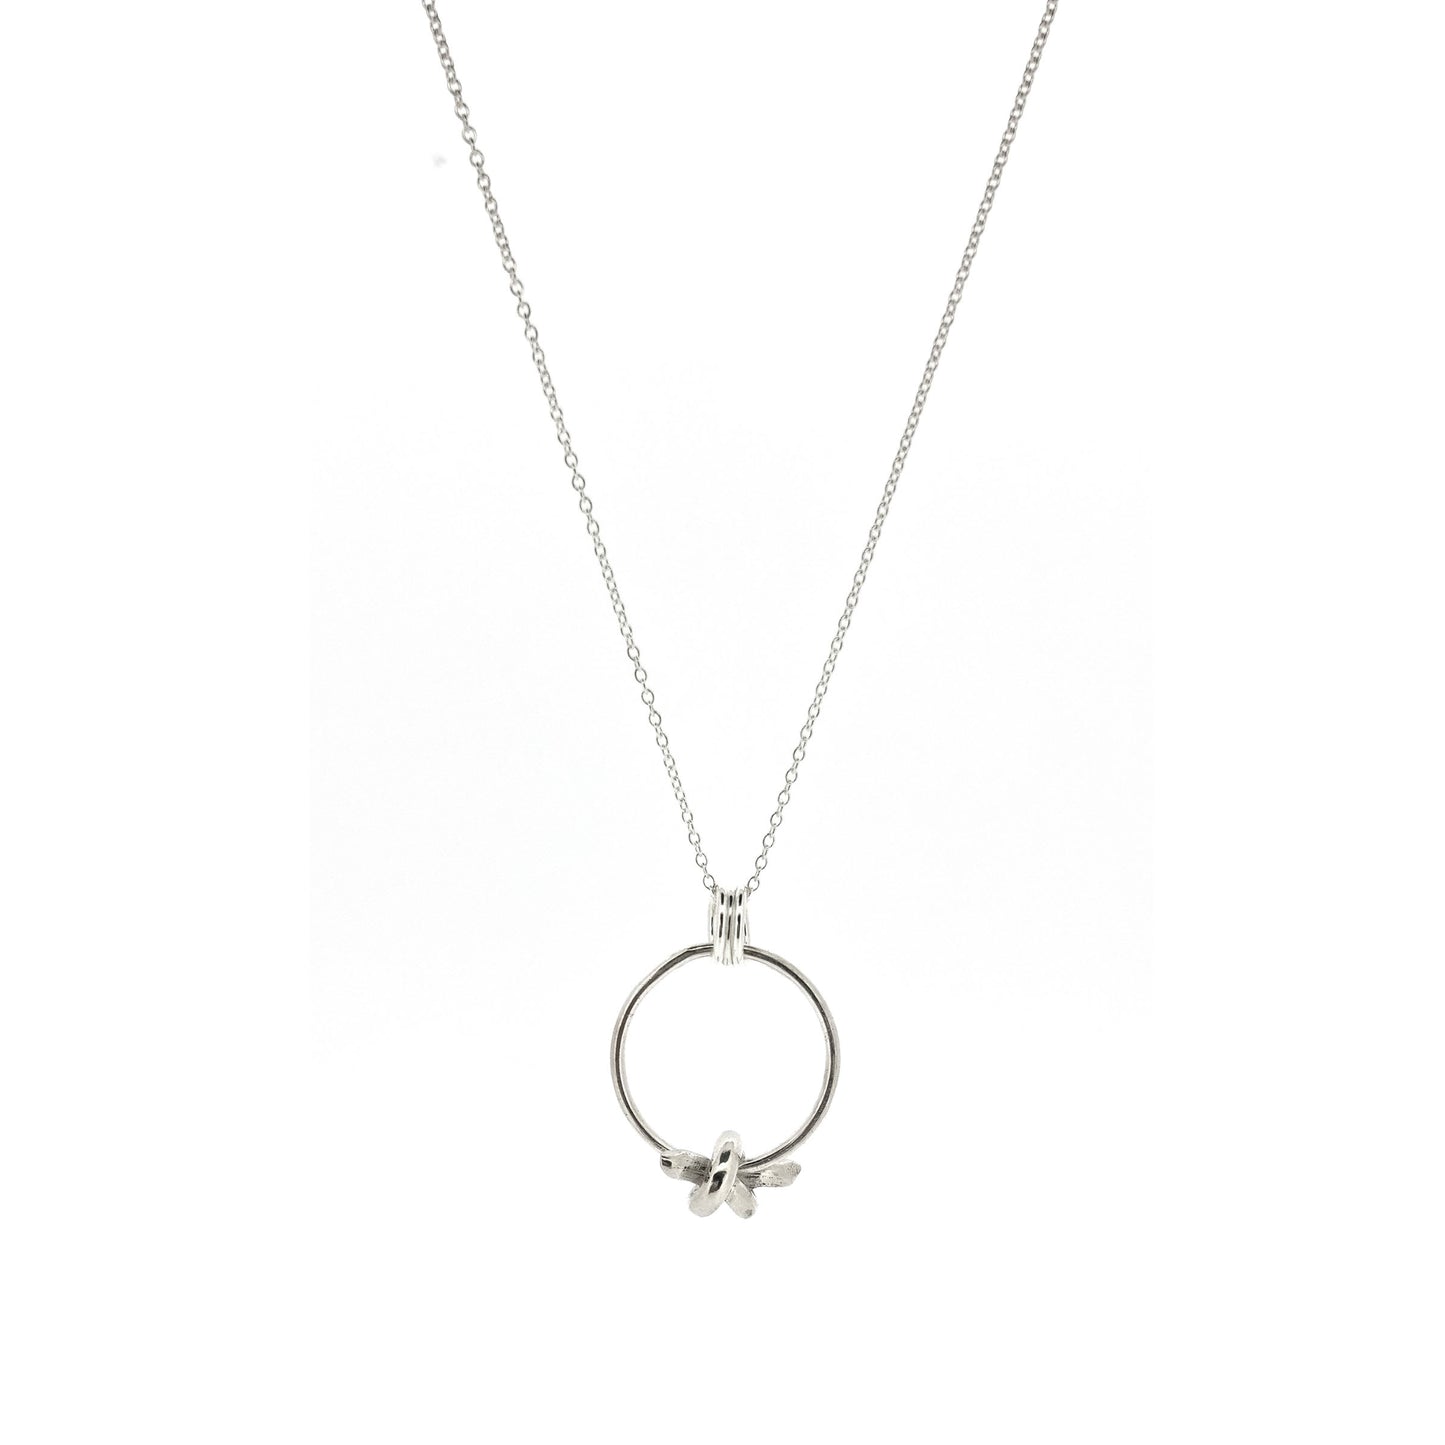 Silver circle pendant with spinning knot charm and triple circle bail. Suspended on a silver chain.